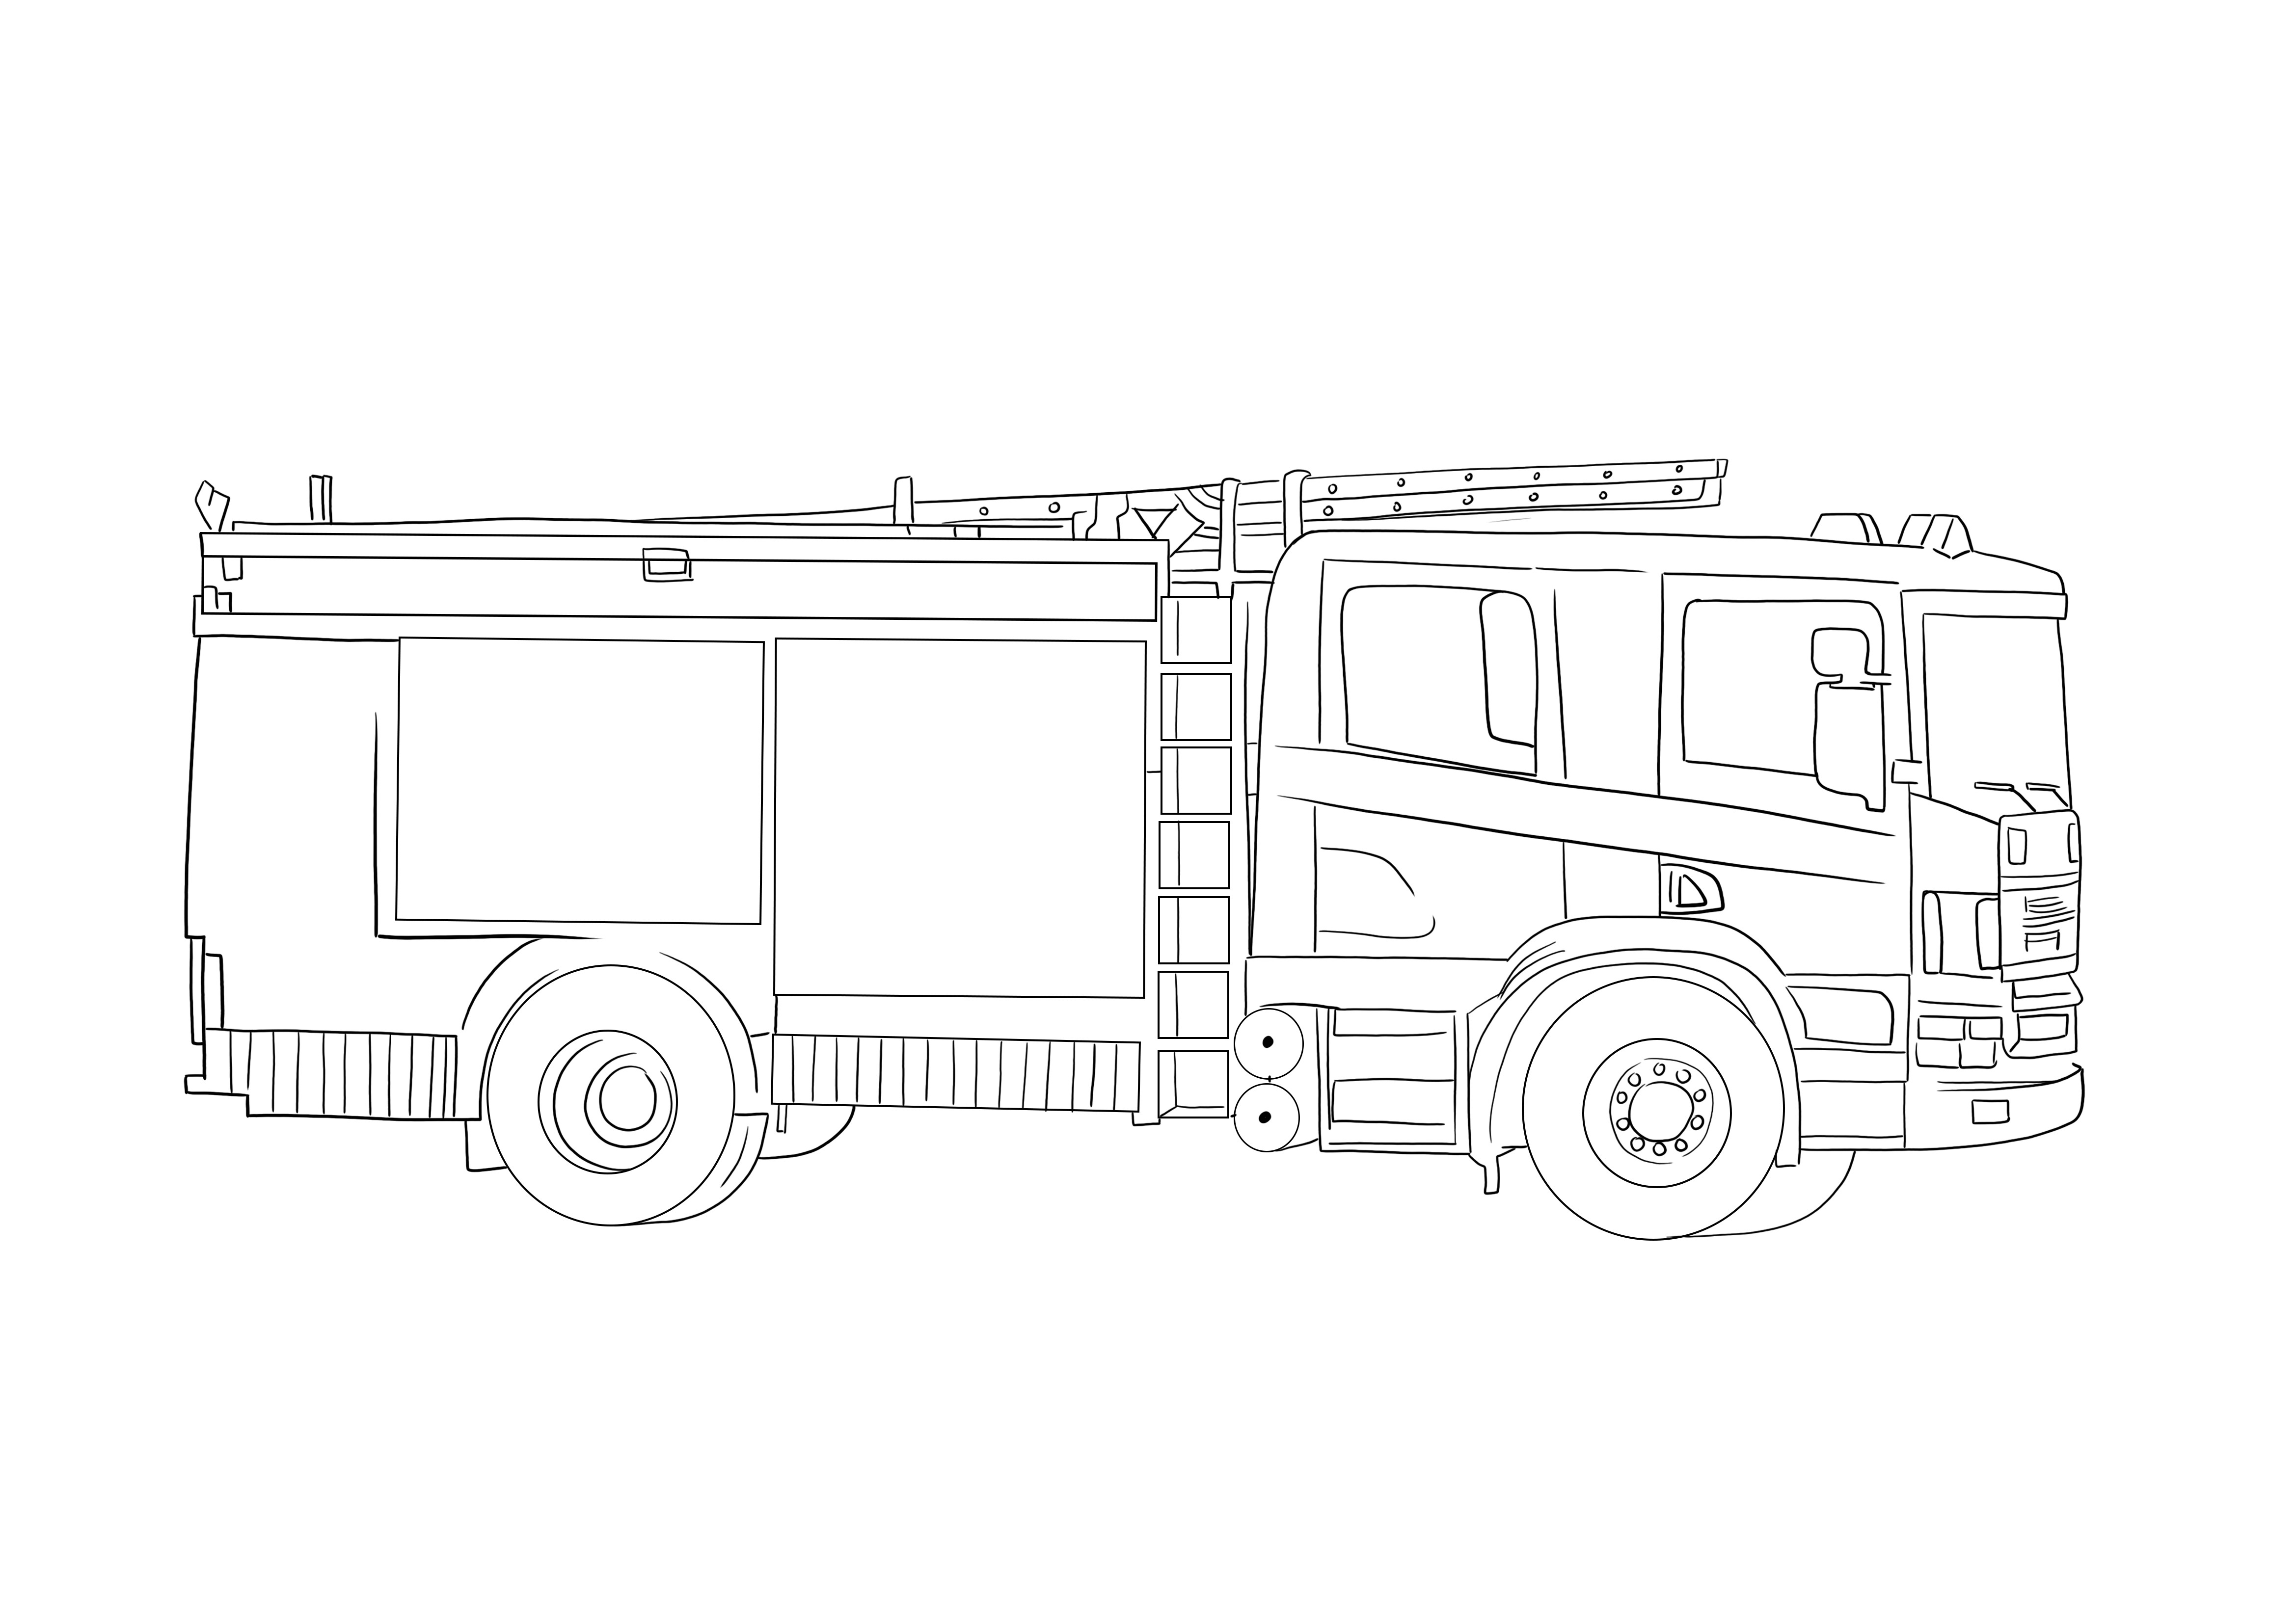 Our Fire Truck coloring sheet is ready to go and be printed